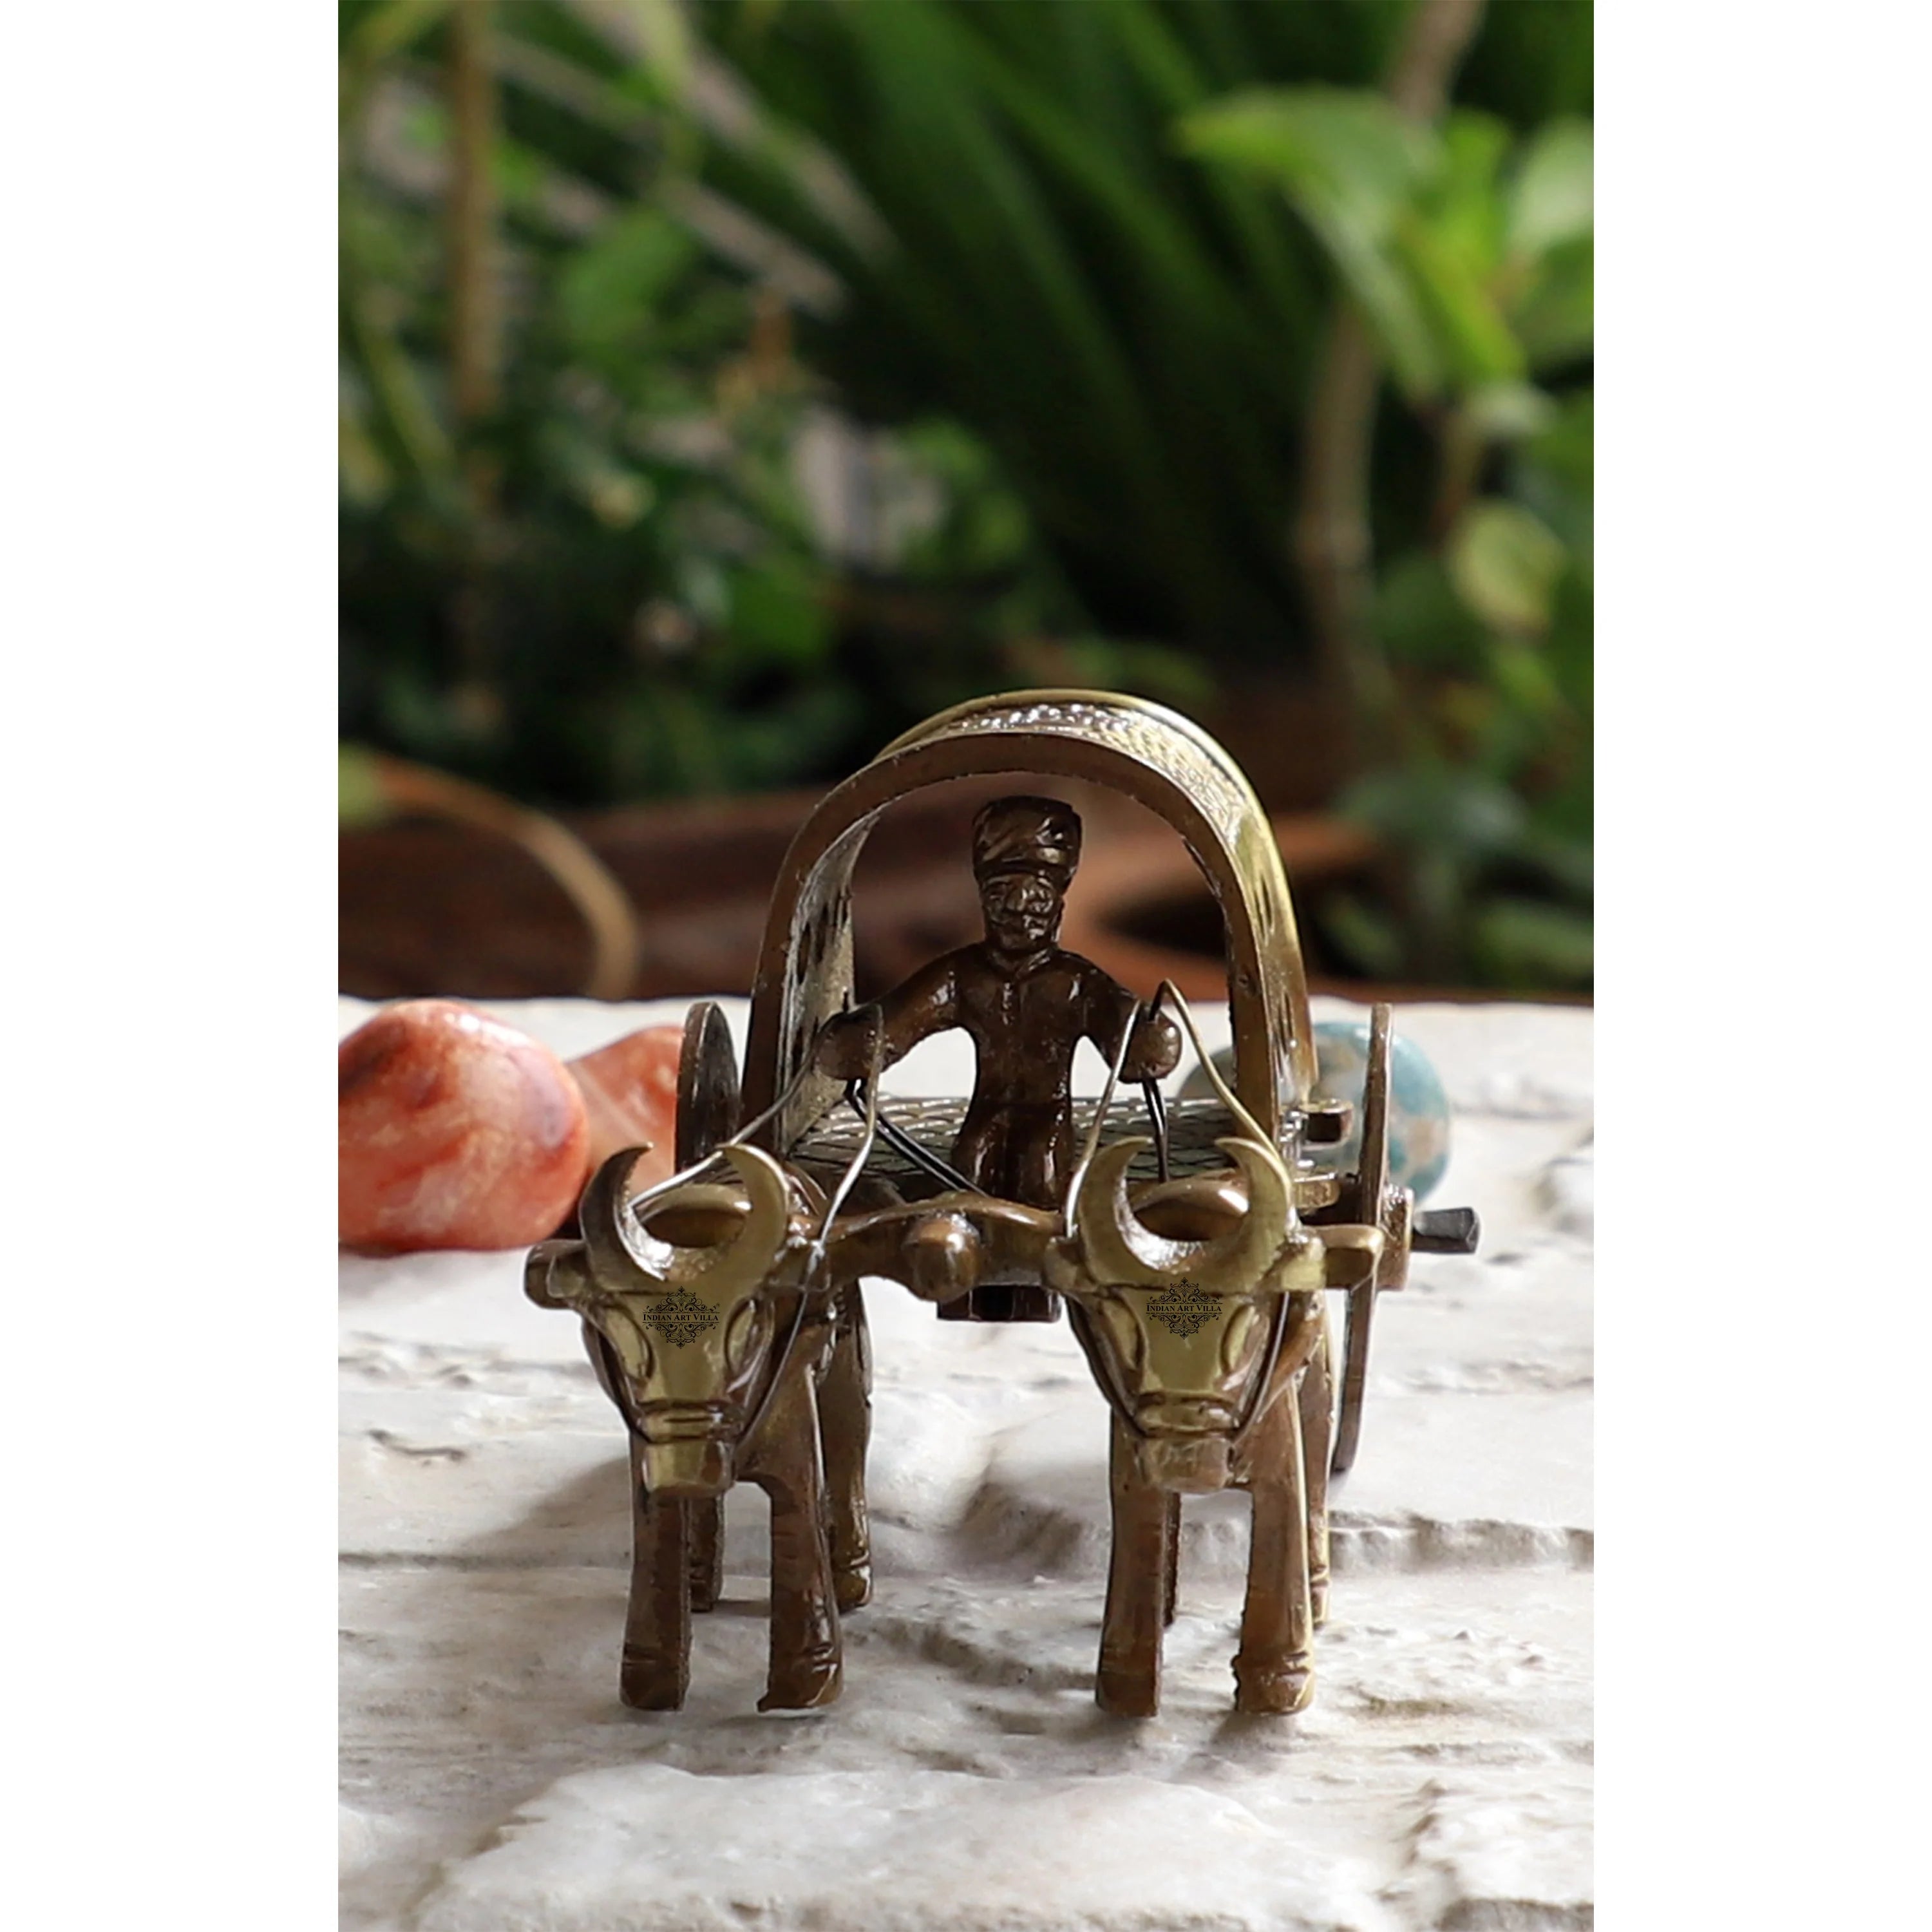 Buy Indian Art Villa Brass Handcrafted Cart With Two Bull Showpiece Figurine,  Home Hotel Office Decorative Item, Size-5.5x11.5 cm Online - Indian Art  Villa